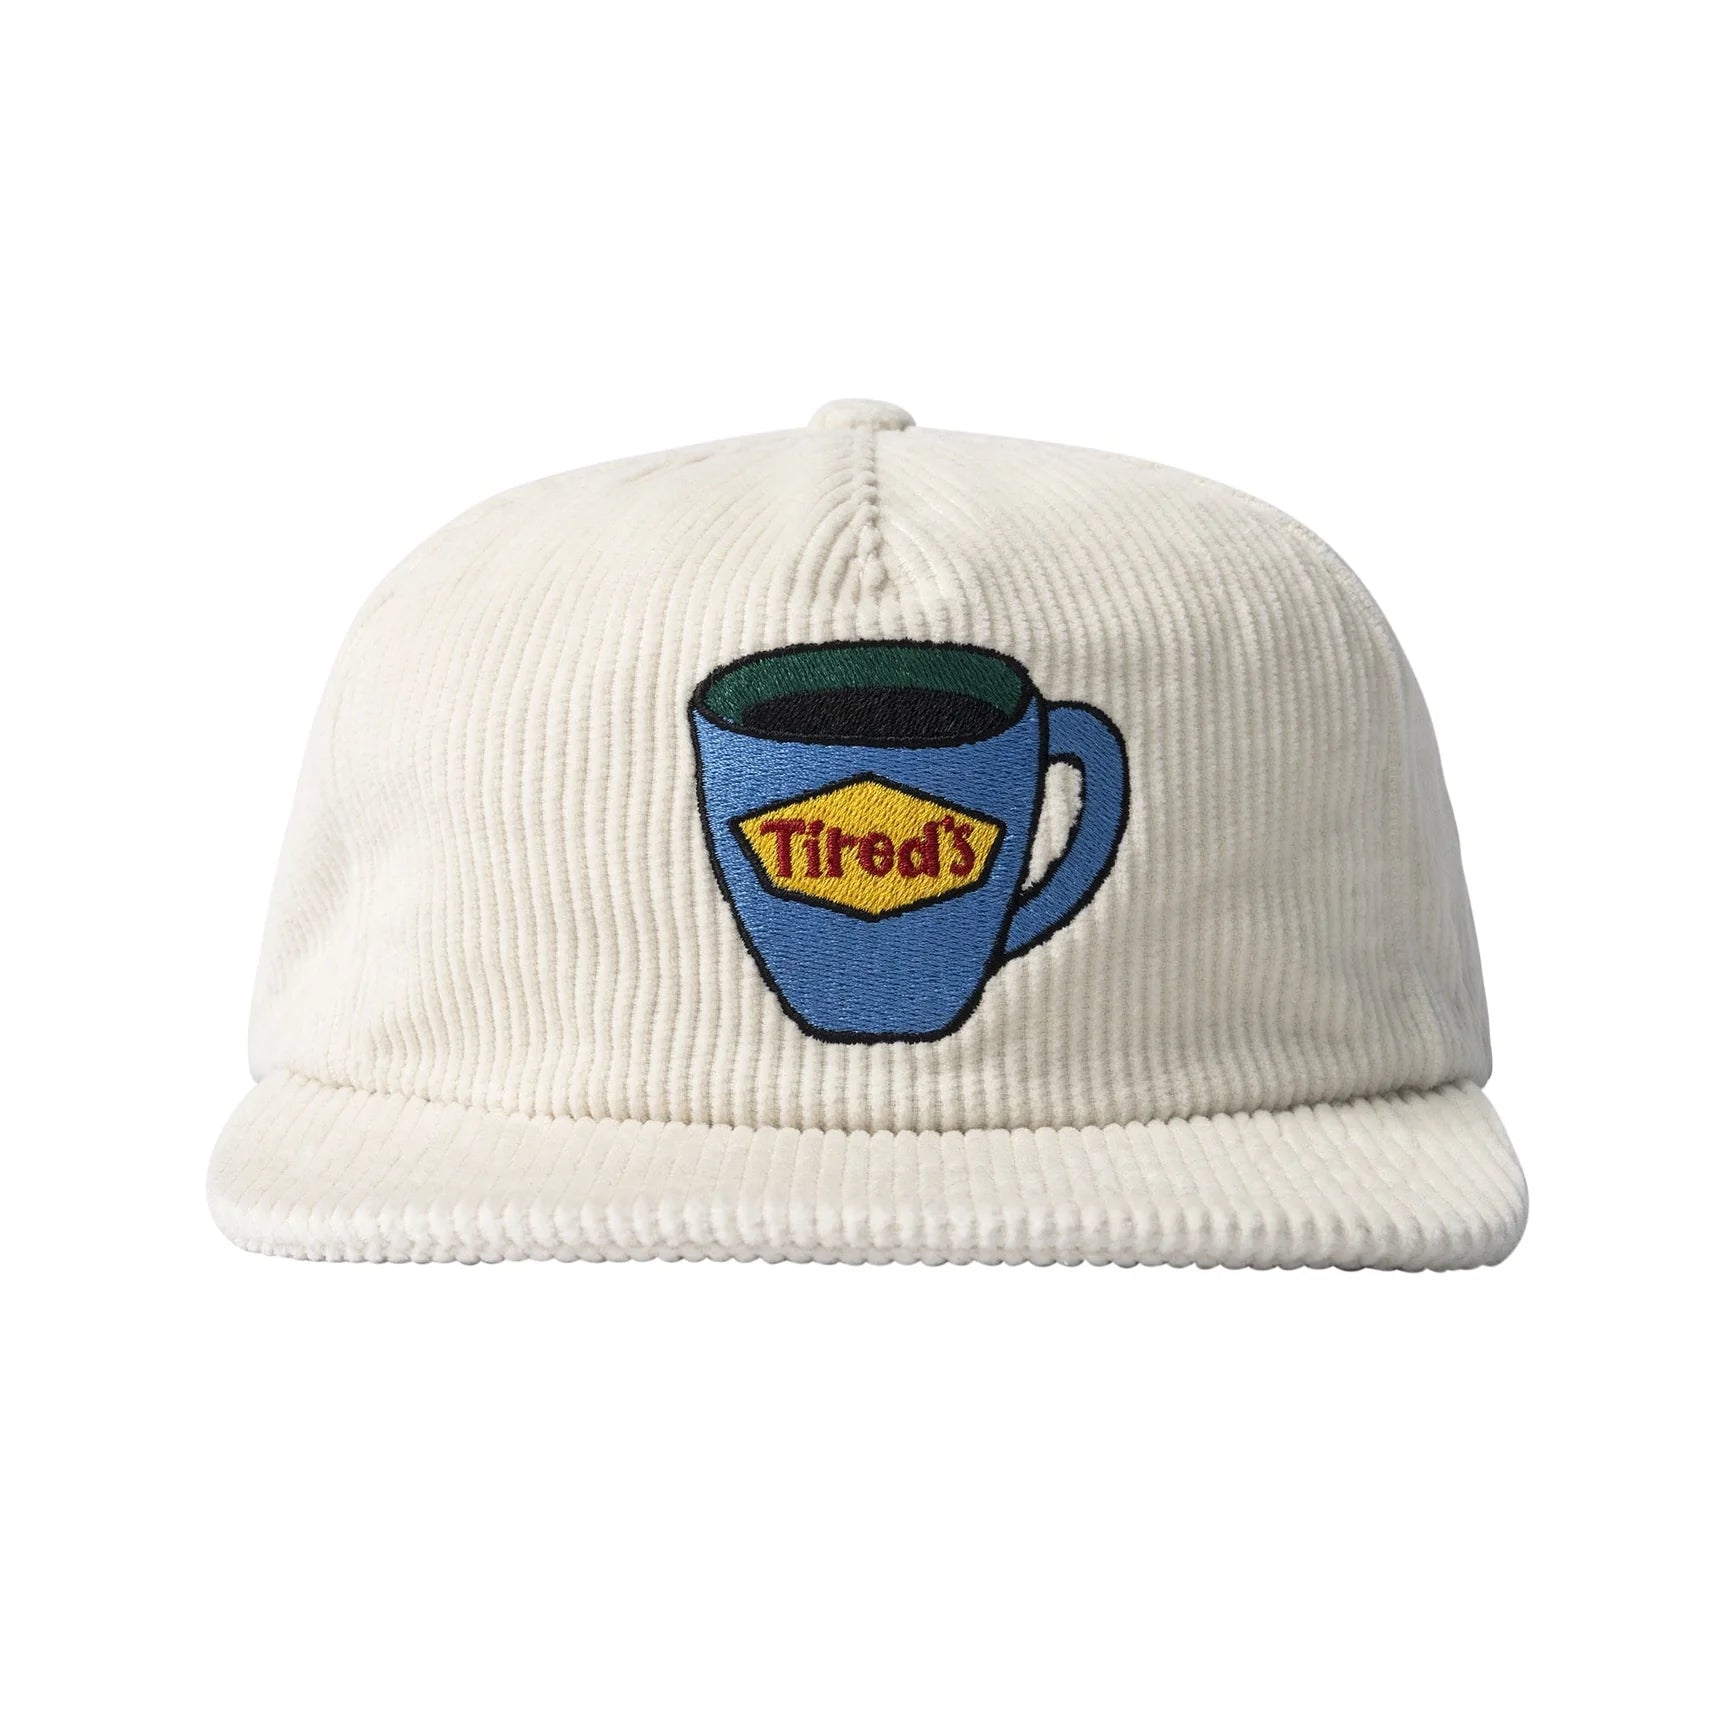 TIRED'S WASHED CORD CAP WHITE